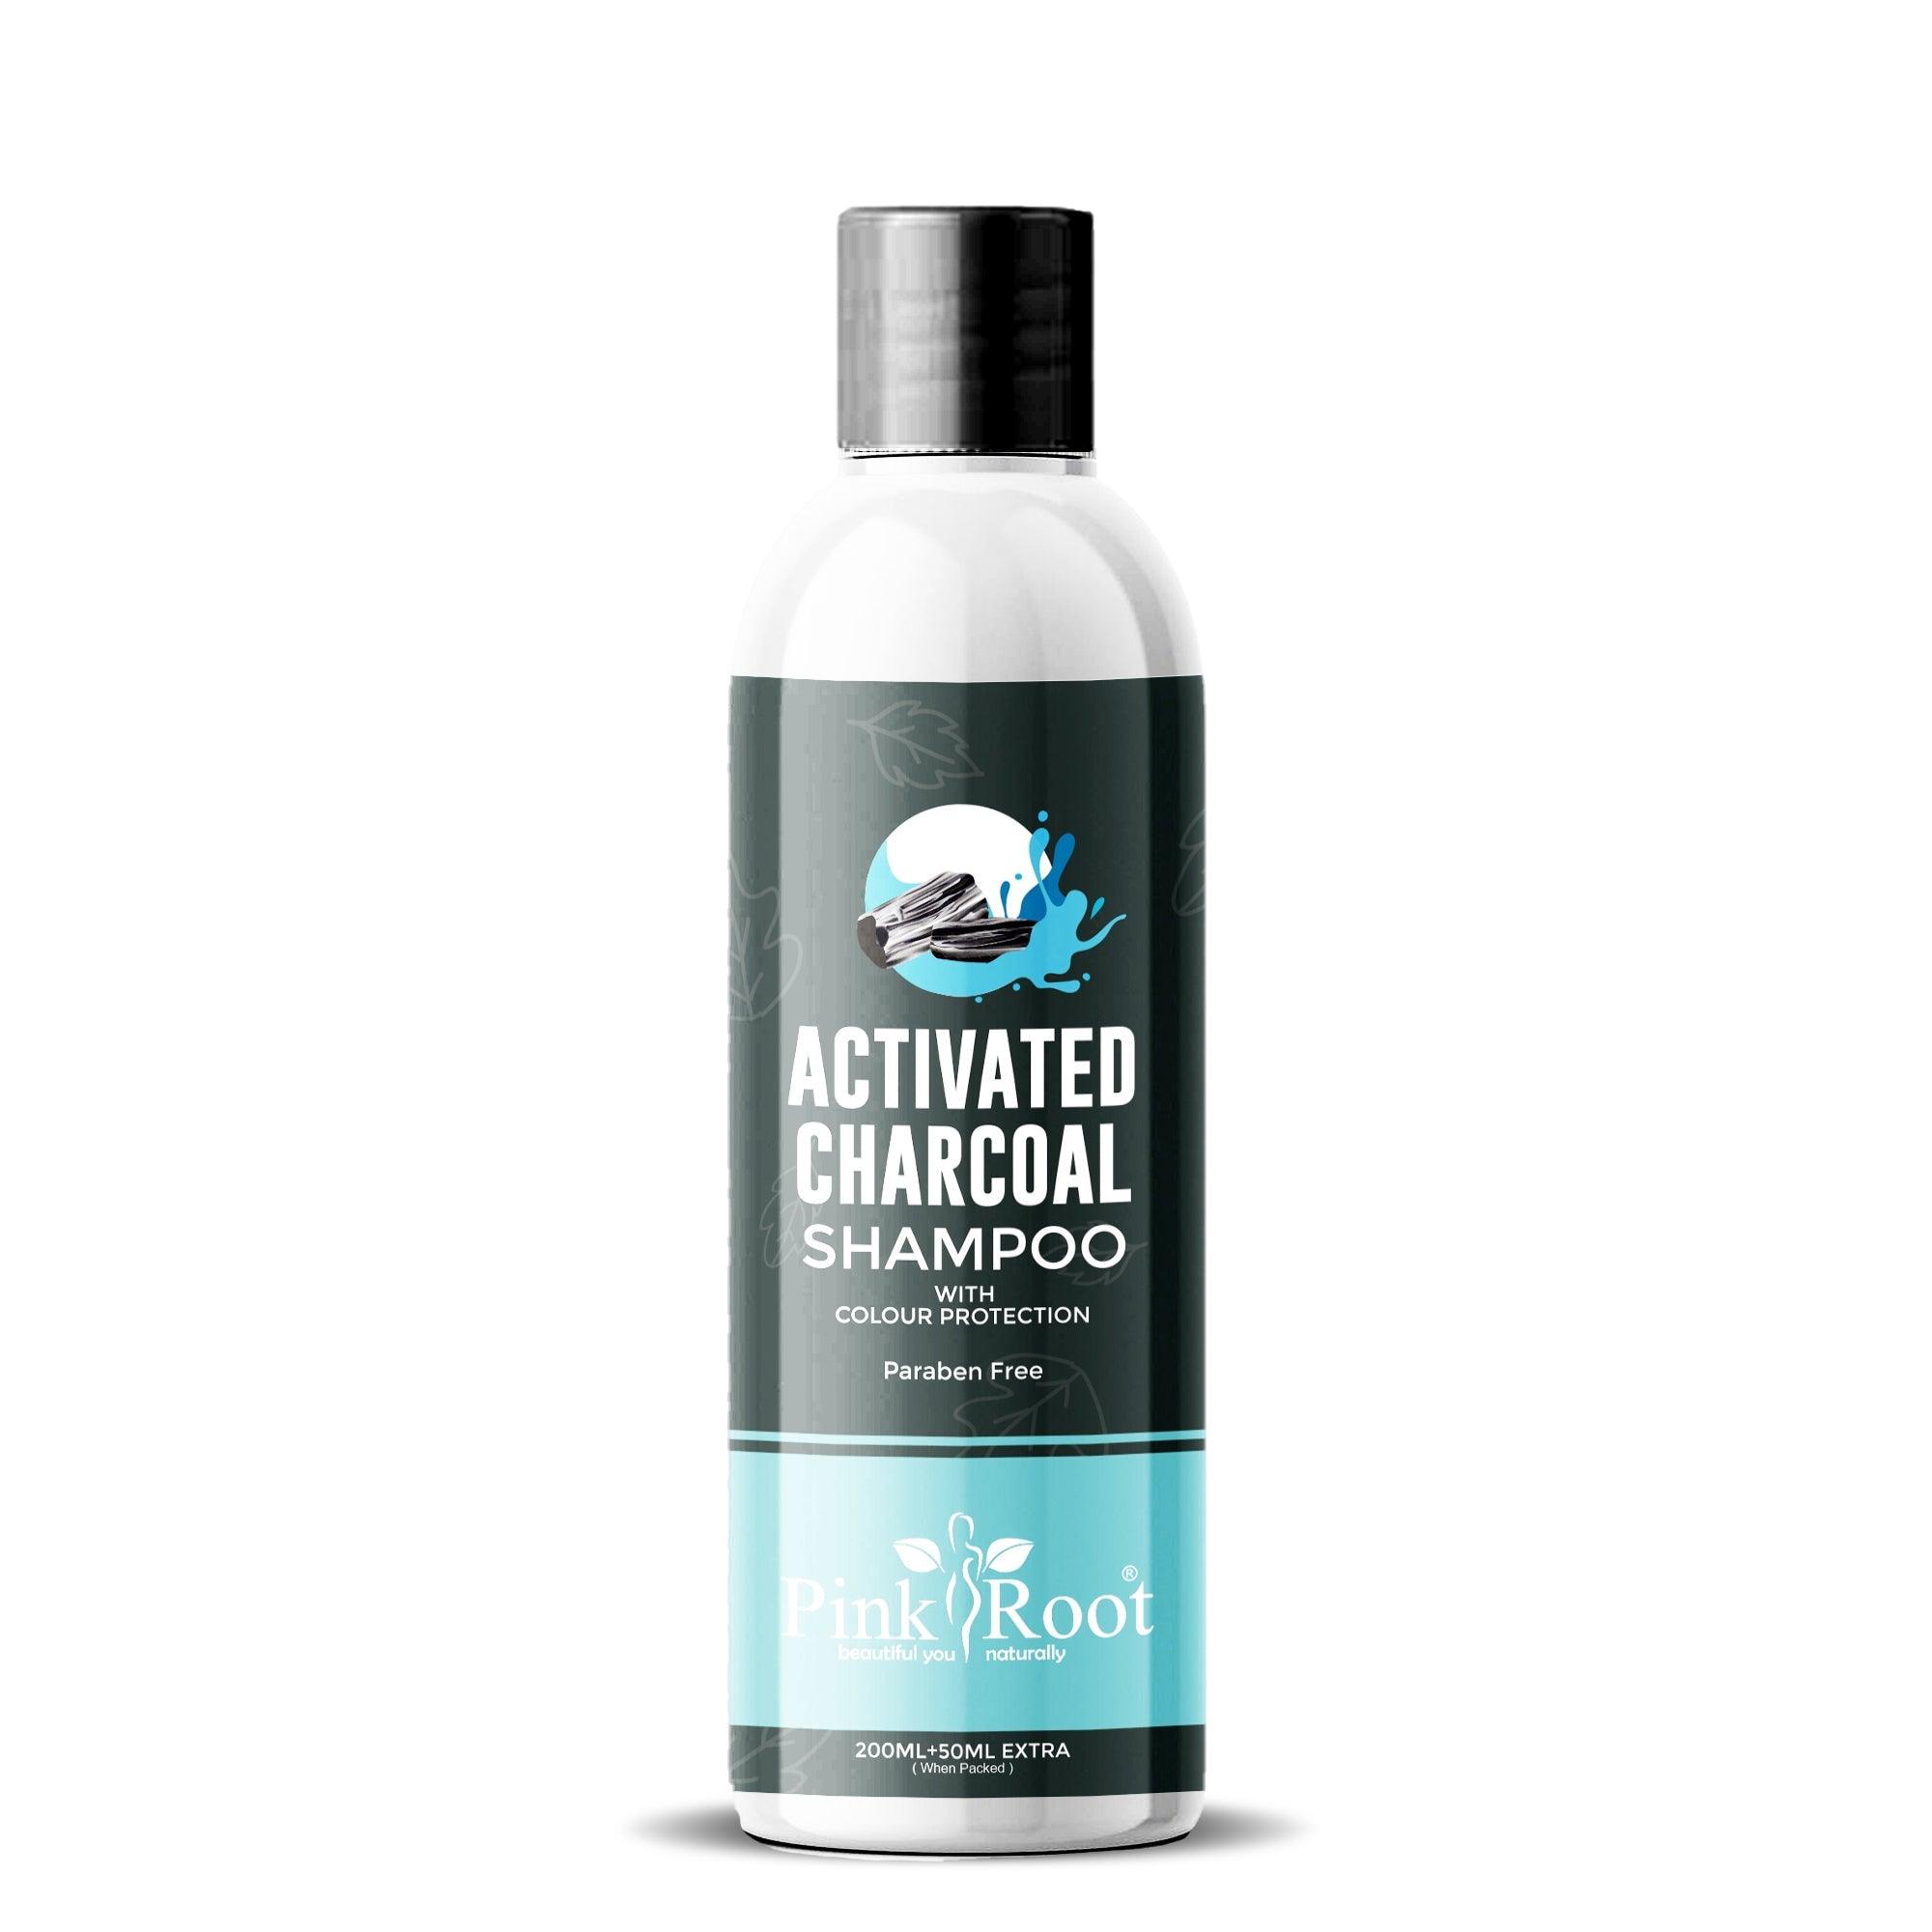 deep-cleansing powers, and this makes this combo highly effective against dirt, pollutants, and toxins. For active, clean, soft, and healthy hair forever!A charcoal shampoo may gently cleanse the skin by drawing dirt and oil, which is then rinsed away